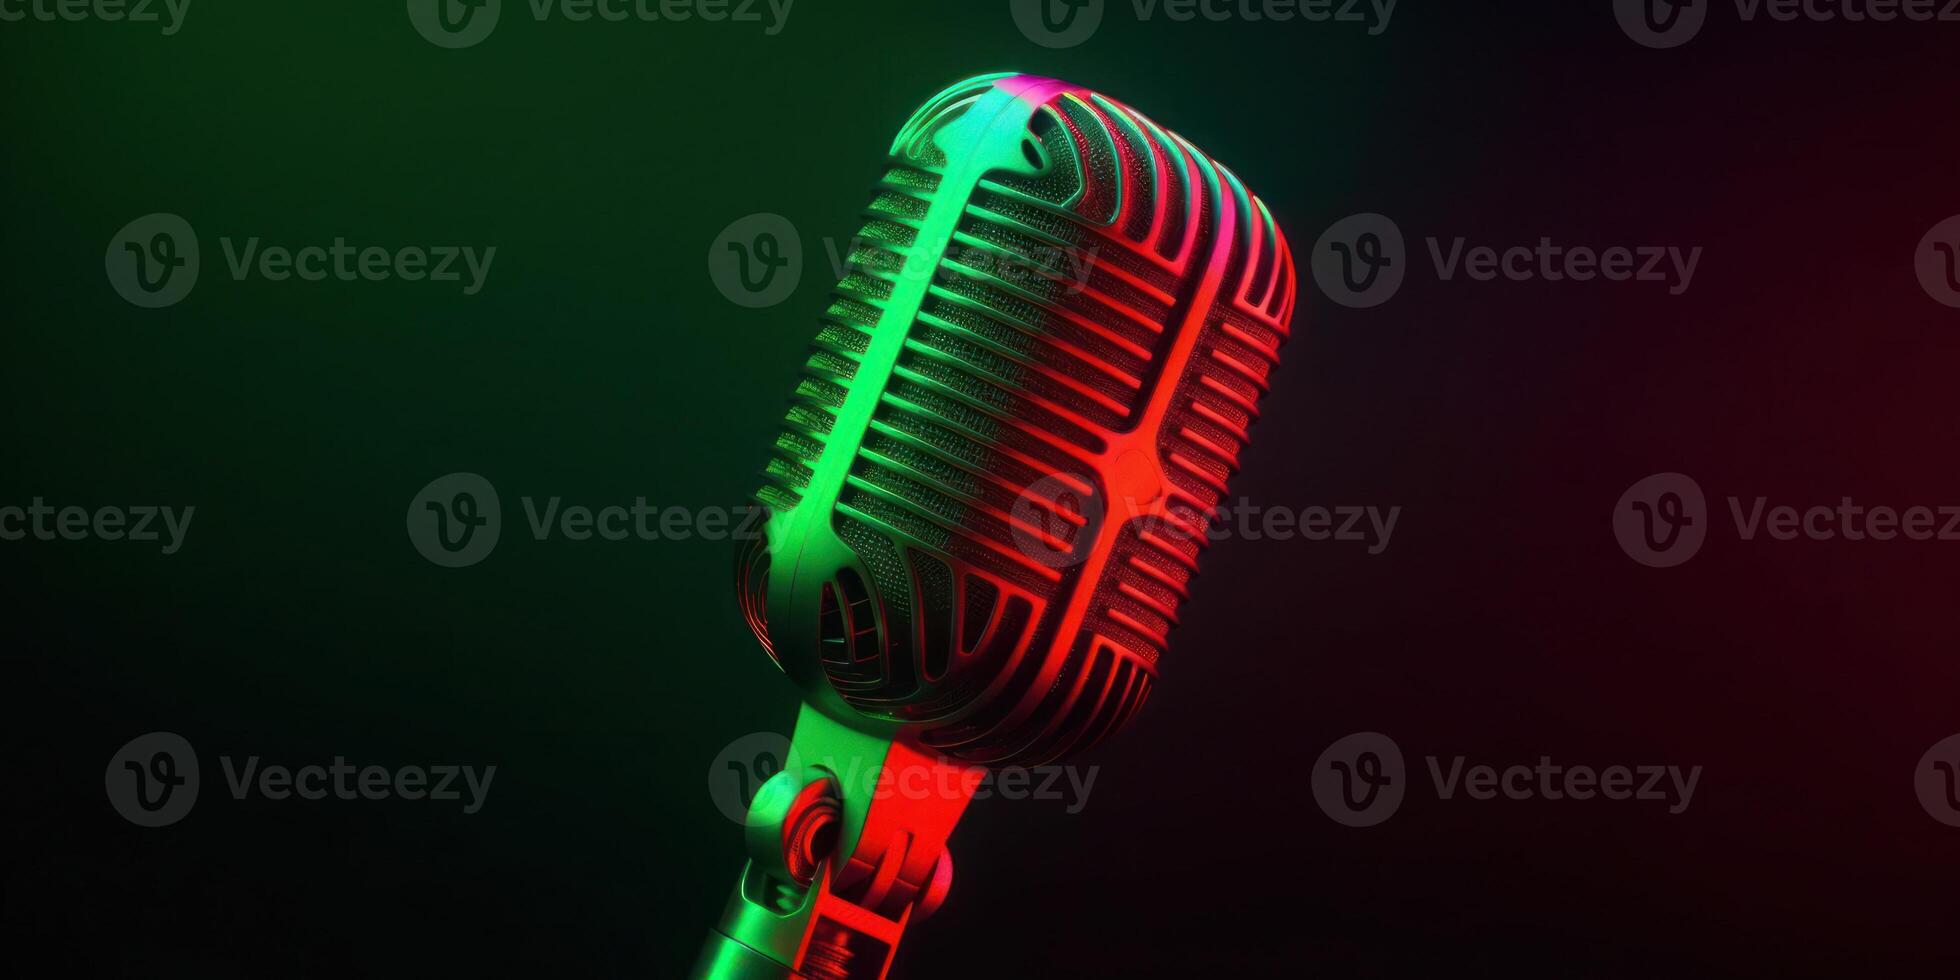 Studio Podcast Microphone on Blurry Neon Background photo